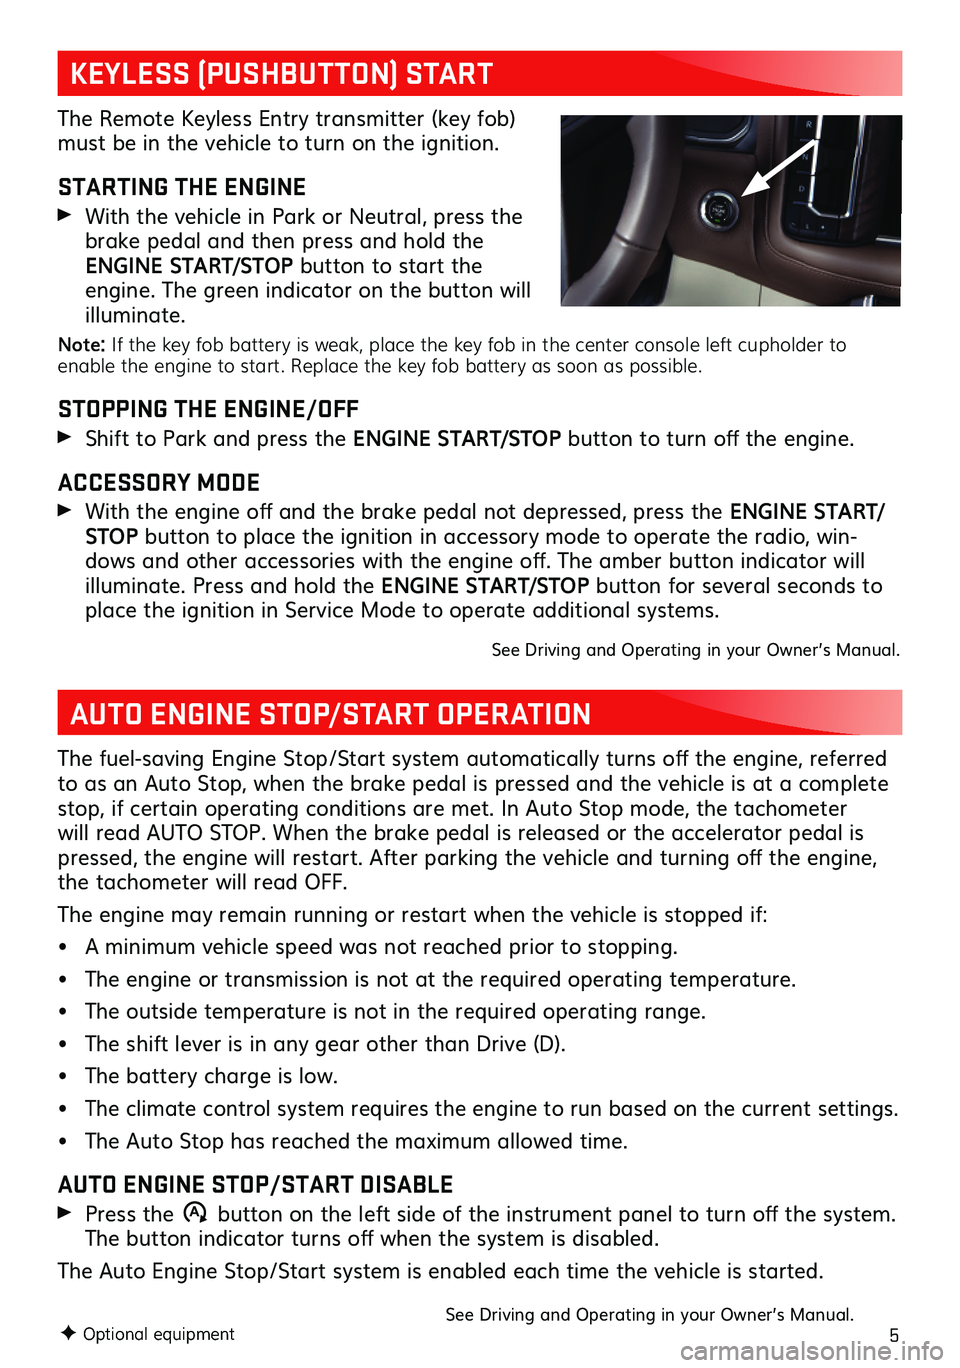 GMC YUKON 2021  Get To Know Guide 5
The fuel-saving Engine Stop/Start system automatically turns off the engine, referred to as an Auto Stop, when the brake pedal is pressed and the vehicle is at a complete stop, if certain operating 